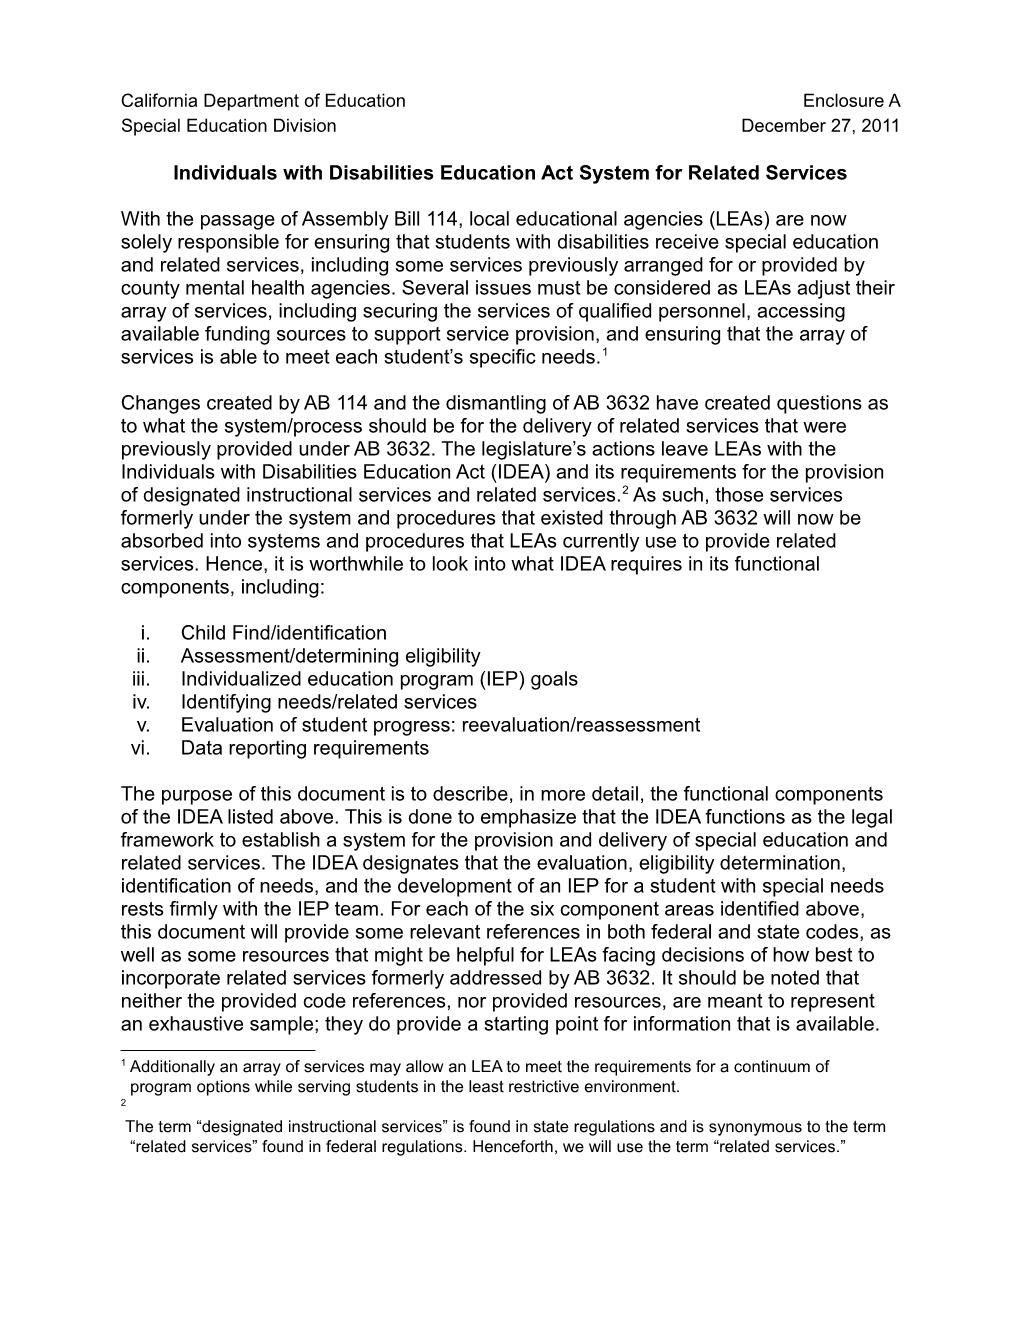 IDEA System for Related Services - Announcements & Current Issues (CA Dept of Education)